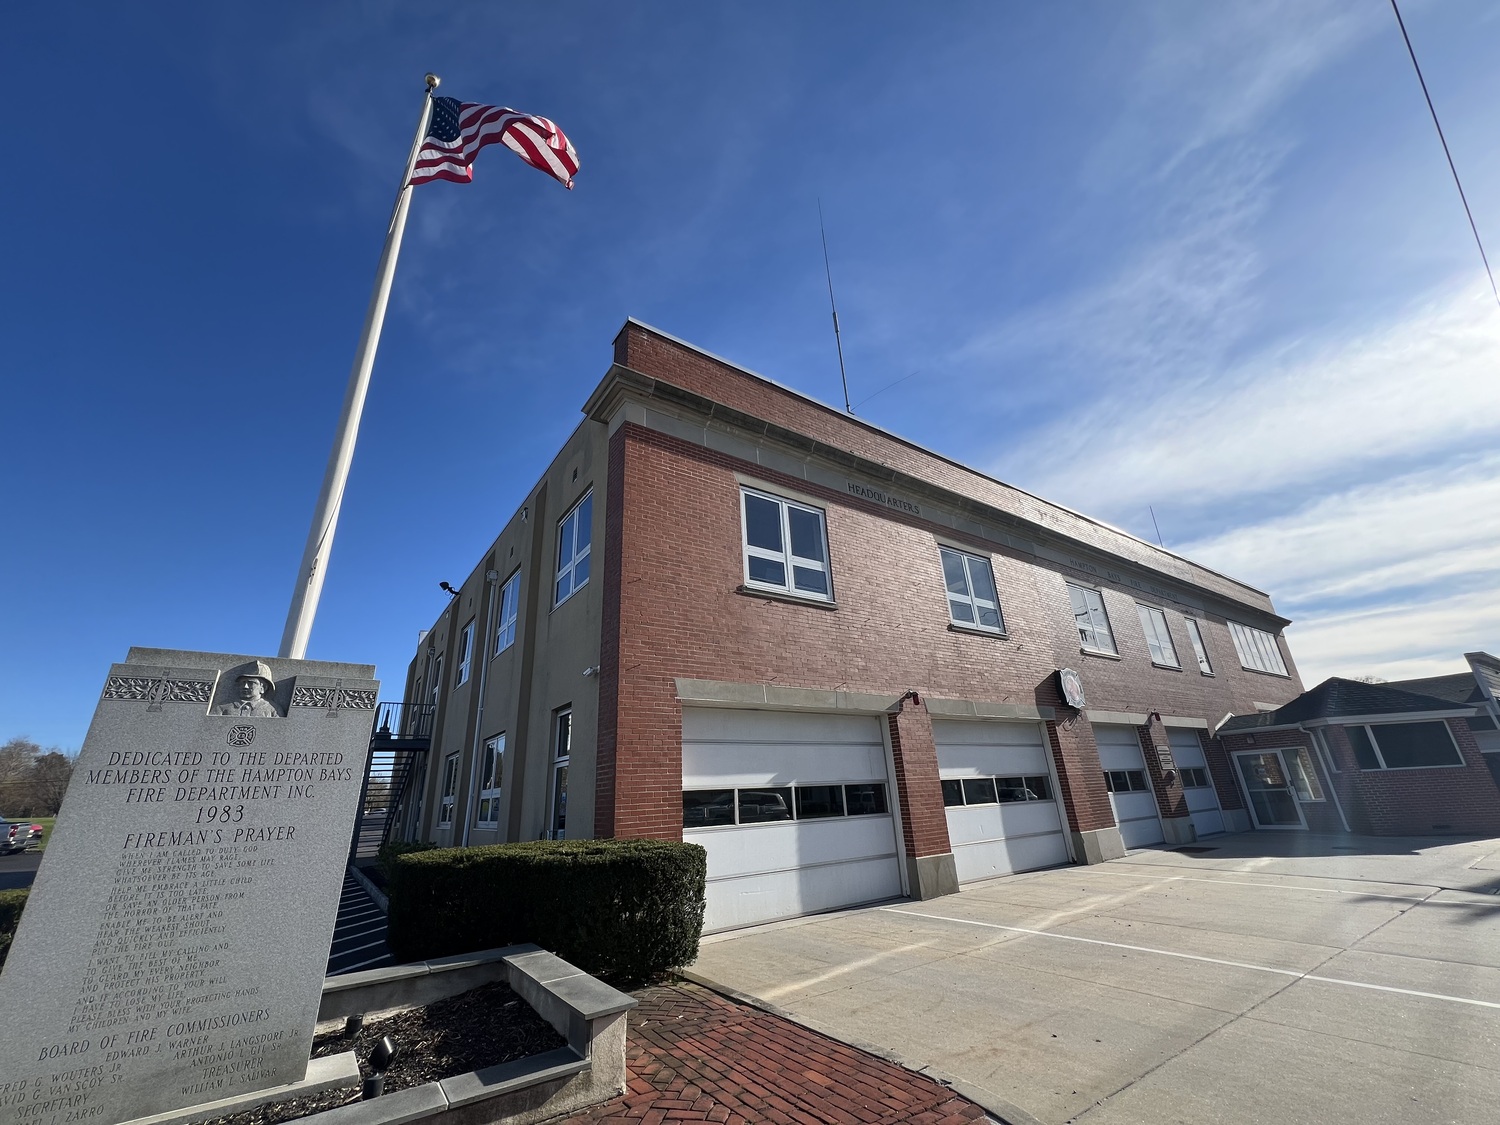 The State DEC is accepting public comments  on a proposed cleanup plan for the Hampton Bays Fire Department headquarters. DANA SHAW